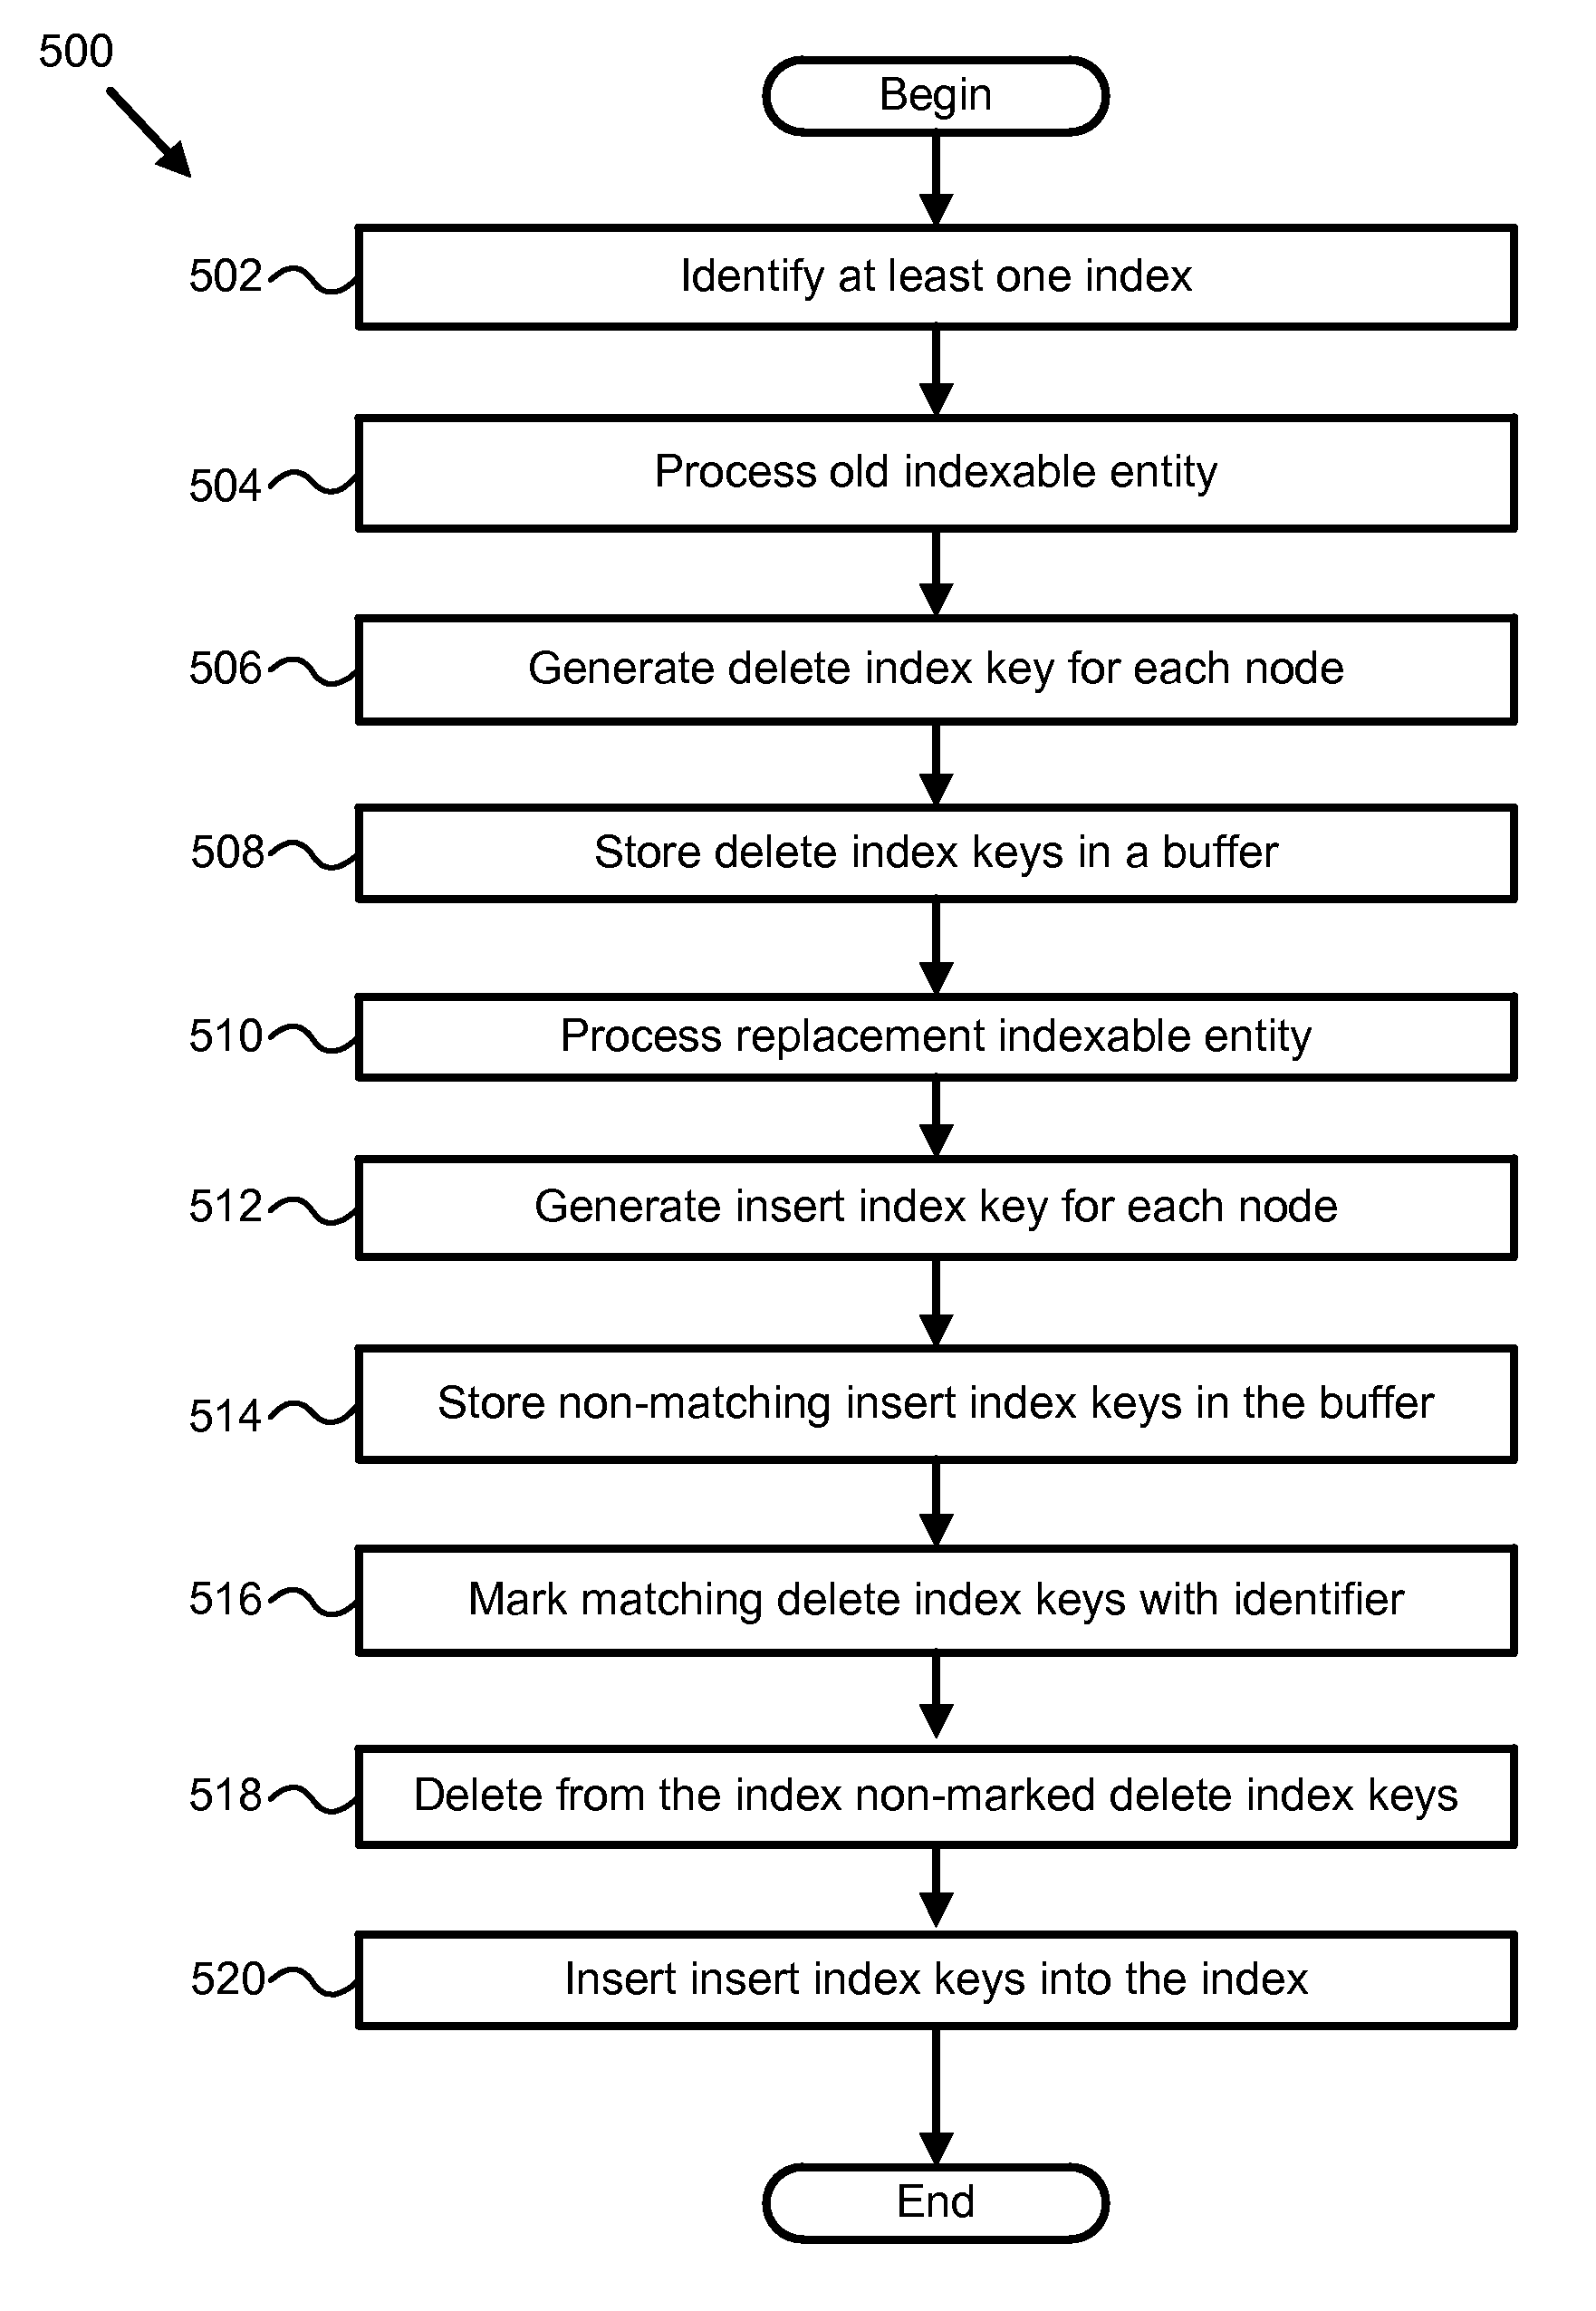 Apparatus, system, and method for improving update performance for indexing using delta key updates